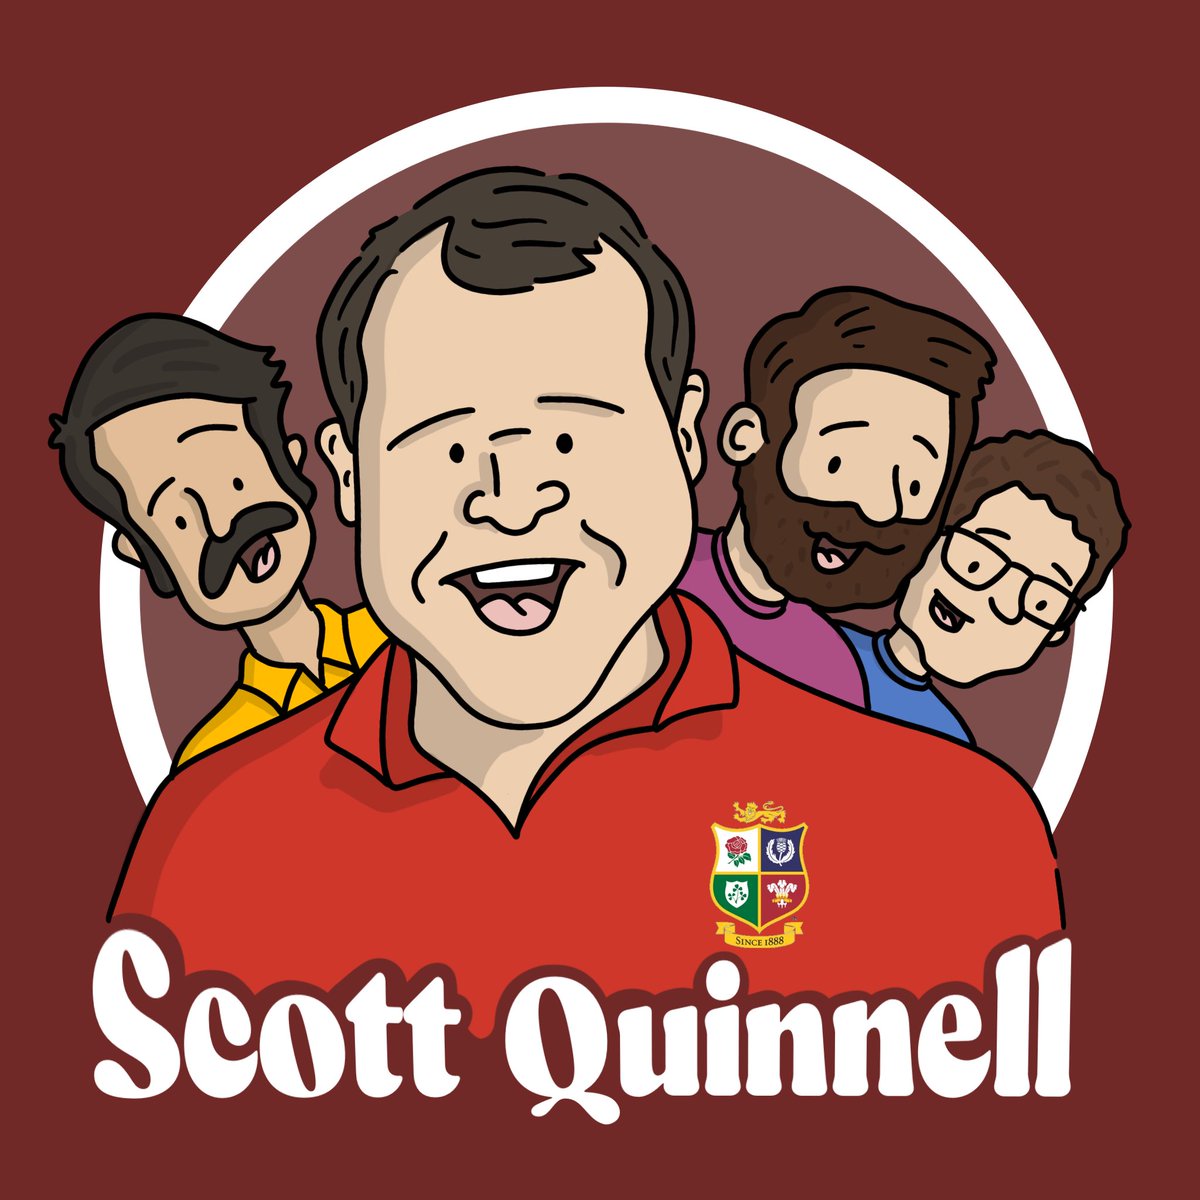 Out today on our Patreon. @ScottQuinnell joins us for this week’s episode. Scott is AMAZING! Part 1 is out tomorrow & Part 2 on Friday on all other platforms.